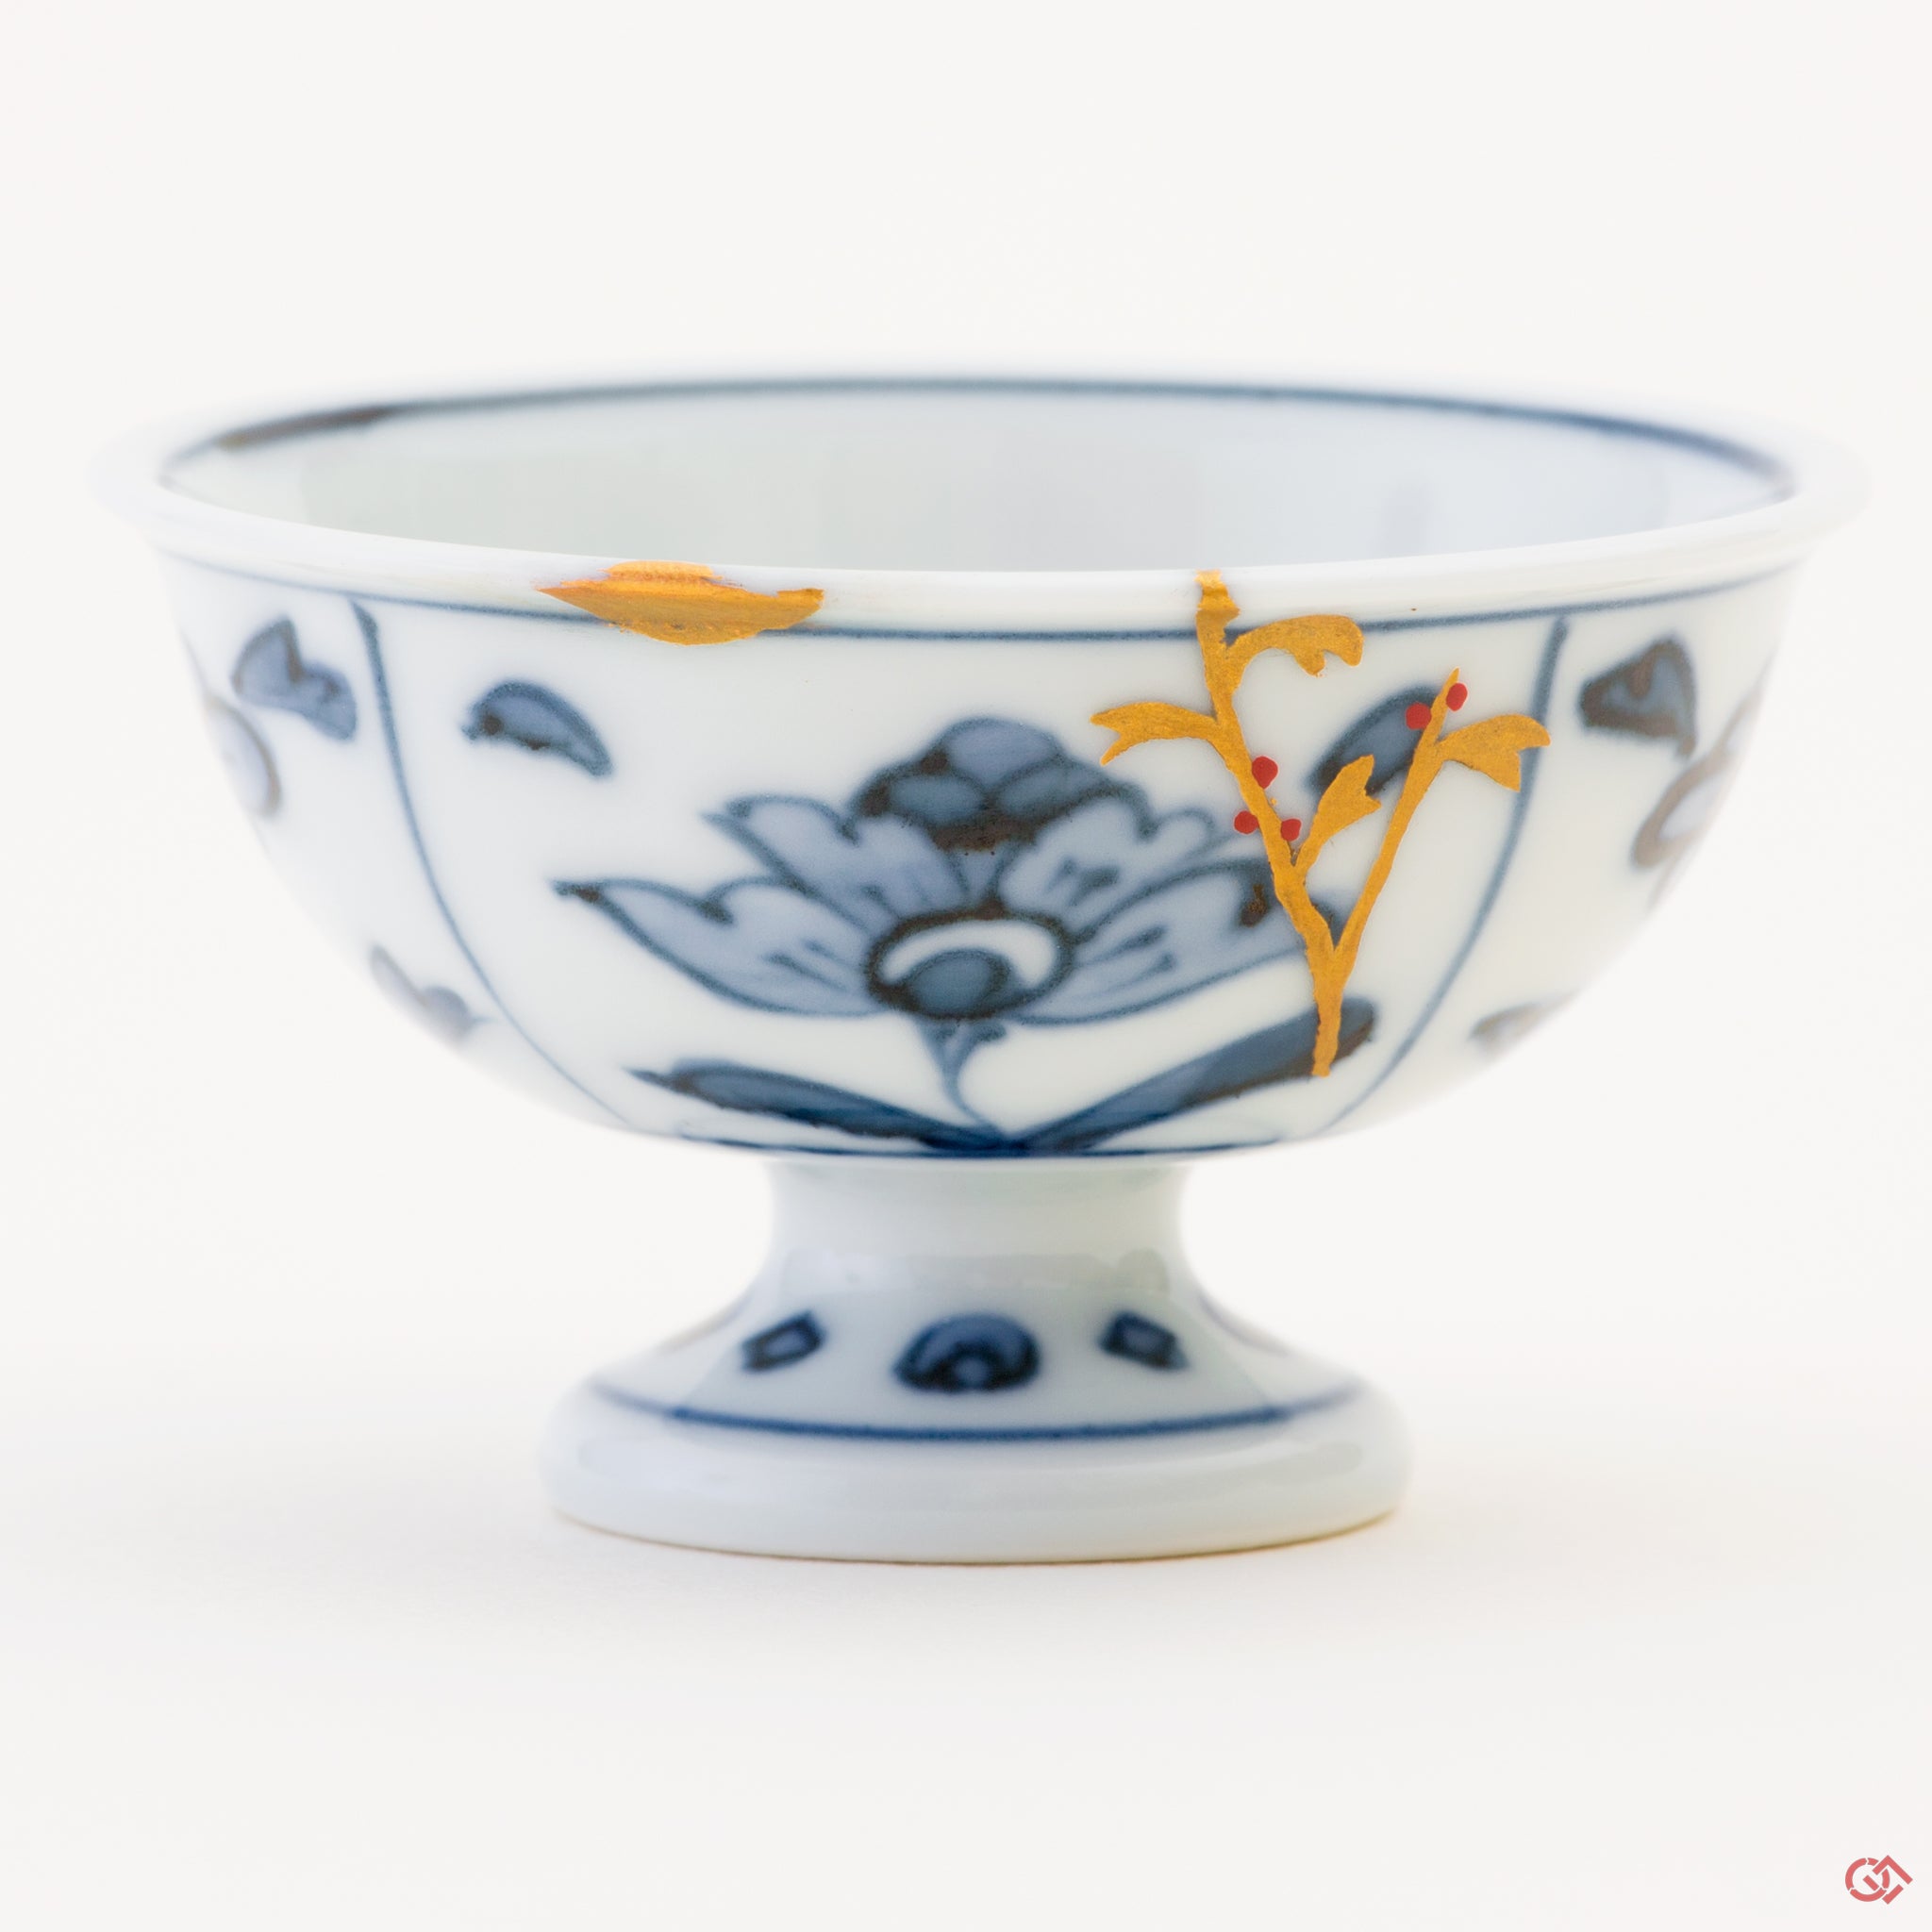 Close-up photo of an authentic Kintsugi pottery piece, showing the detail of its repairs and craftsmanship: